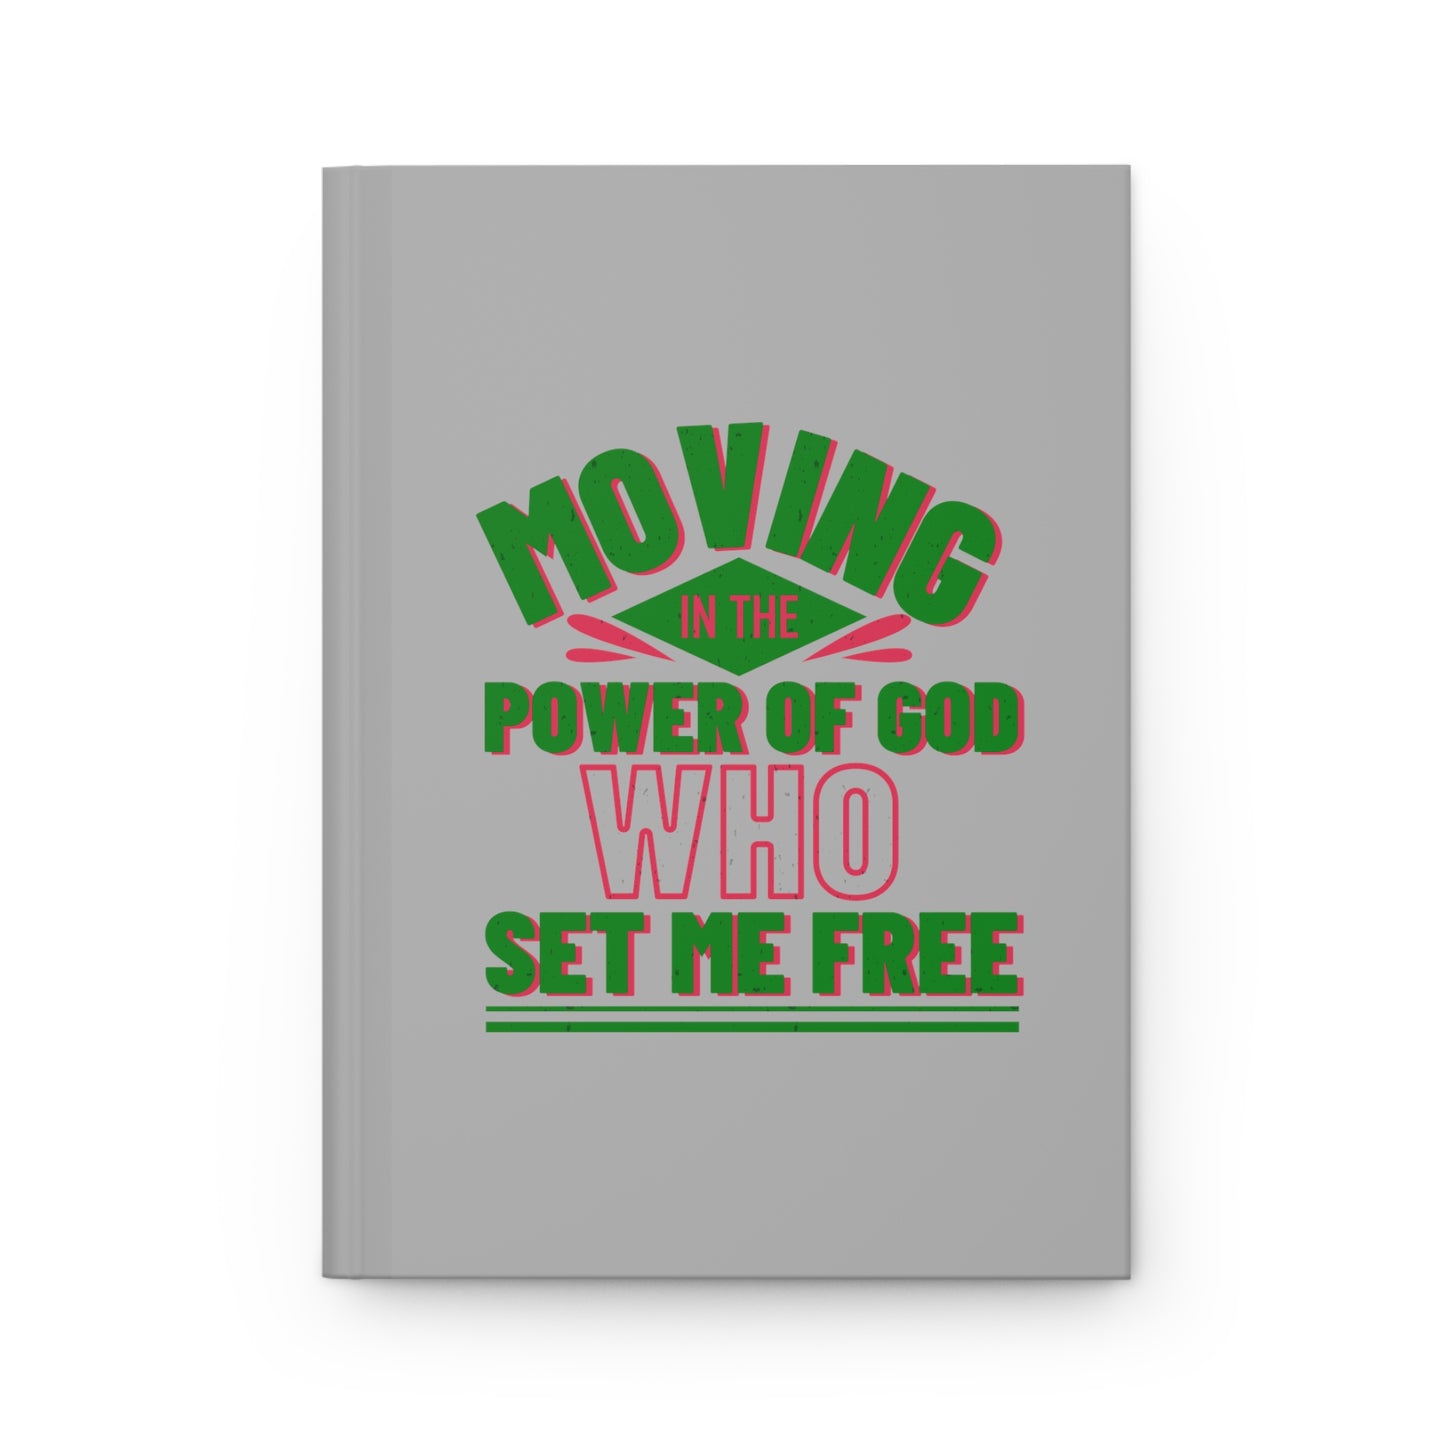 Moving In The Power Of God Who Set Me Free Hardcover Journal Matte